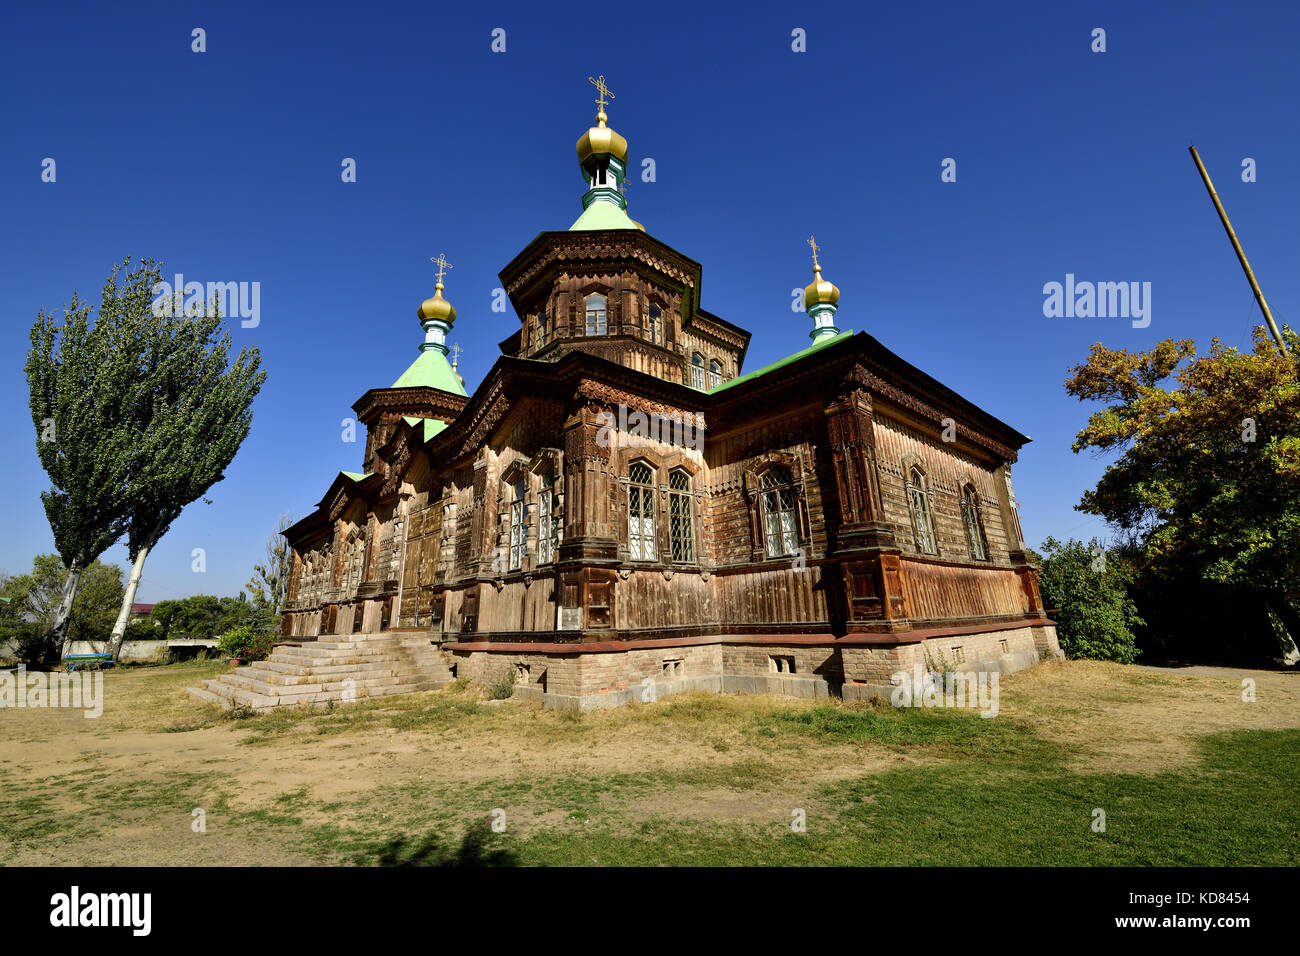 Russian Orthodox church,Kyrgyzstan,Central Asia, Travel, Silk Road Stock Photo